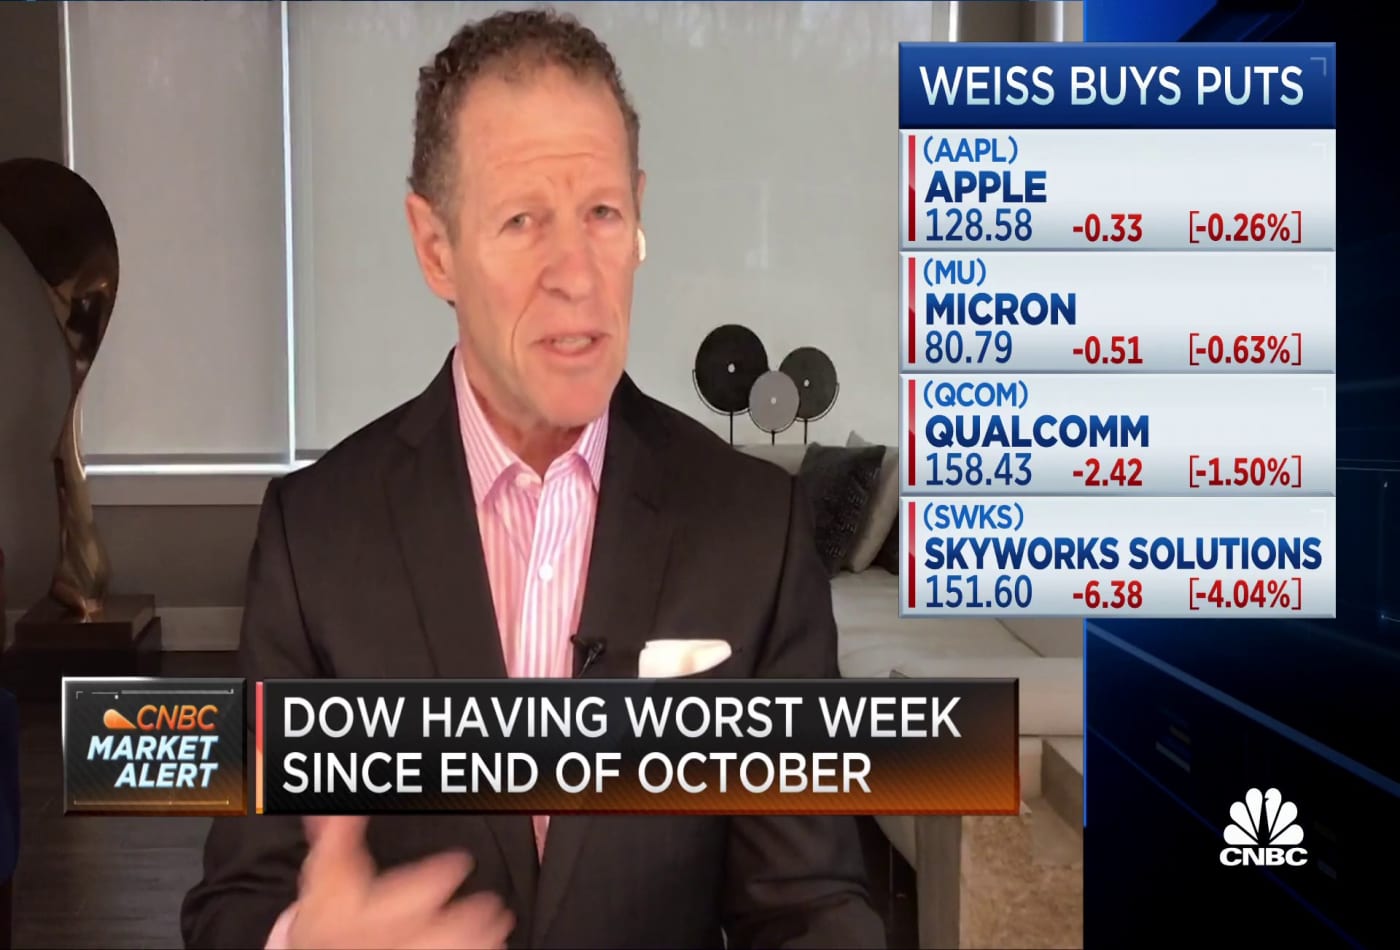 Steve Weiss buys puts on a down day for the markets ...